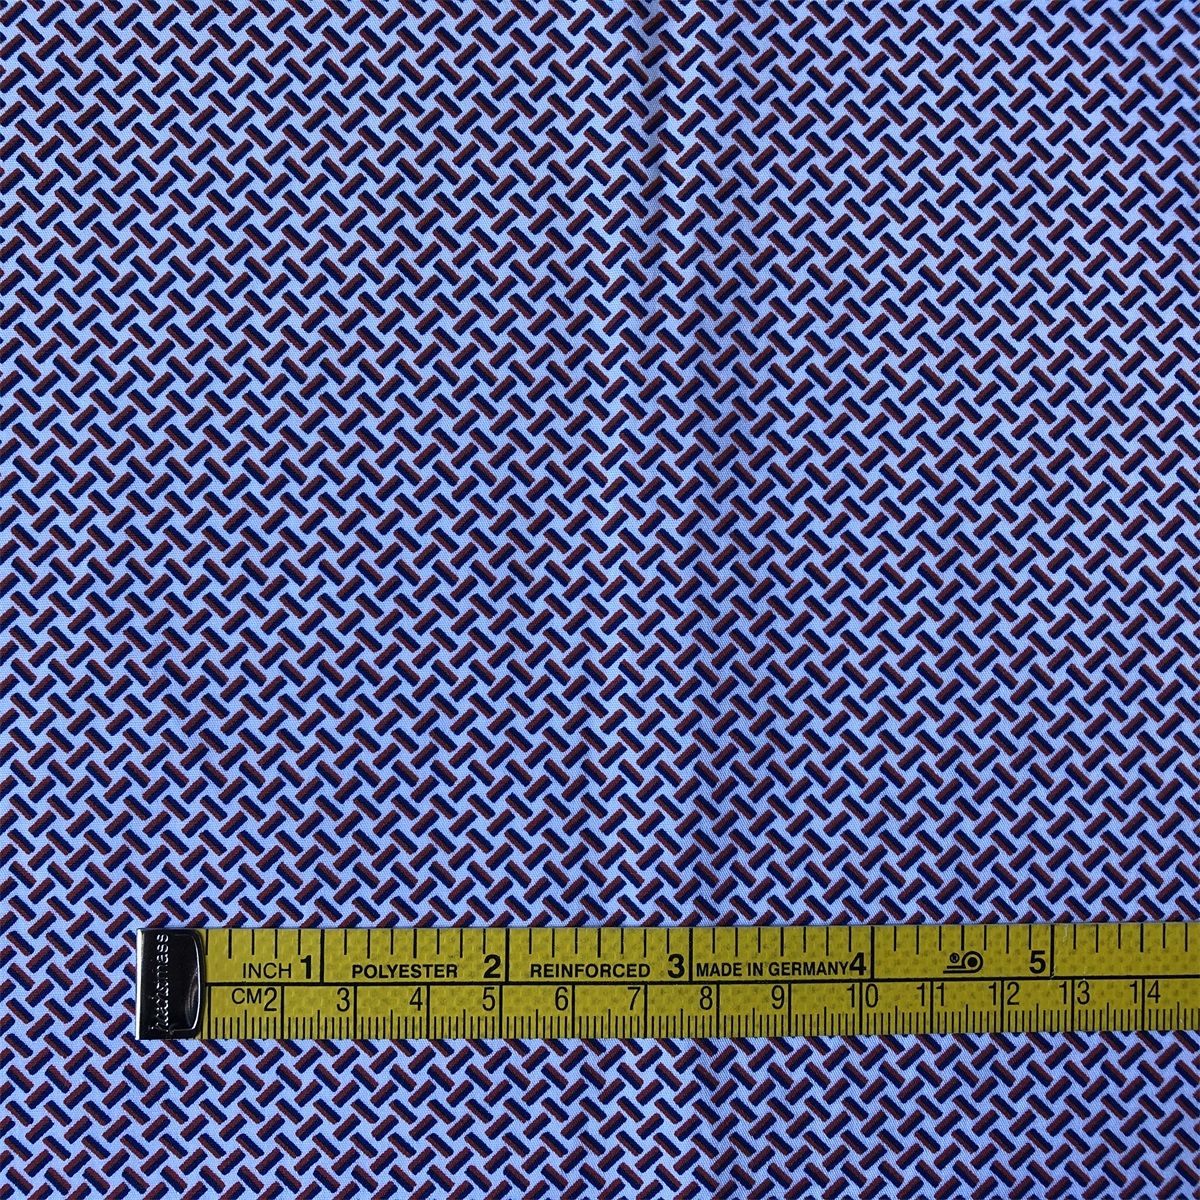 Sun-rising Textile Cotton fabric new fashionable pattern 100% cotton poplin printed fabric for men's casual shirts